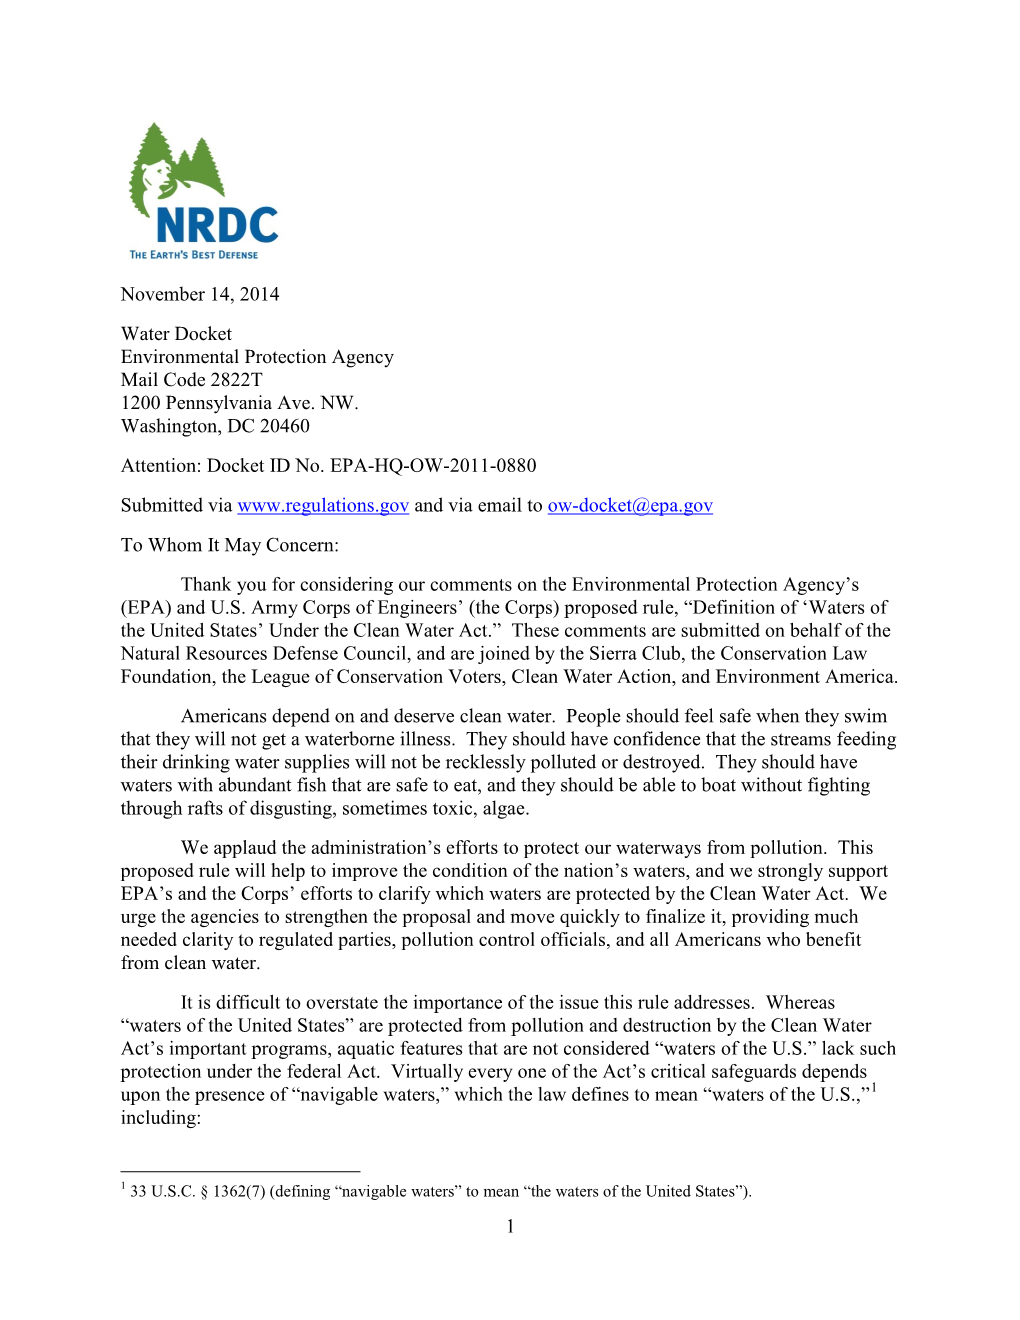 NRDC Comments for Proposed Clean Water Protection Rule (PDF)